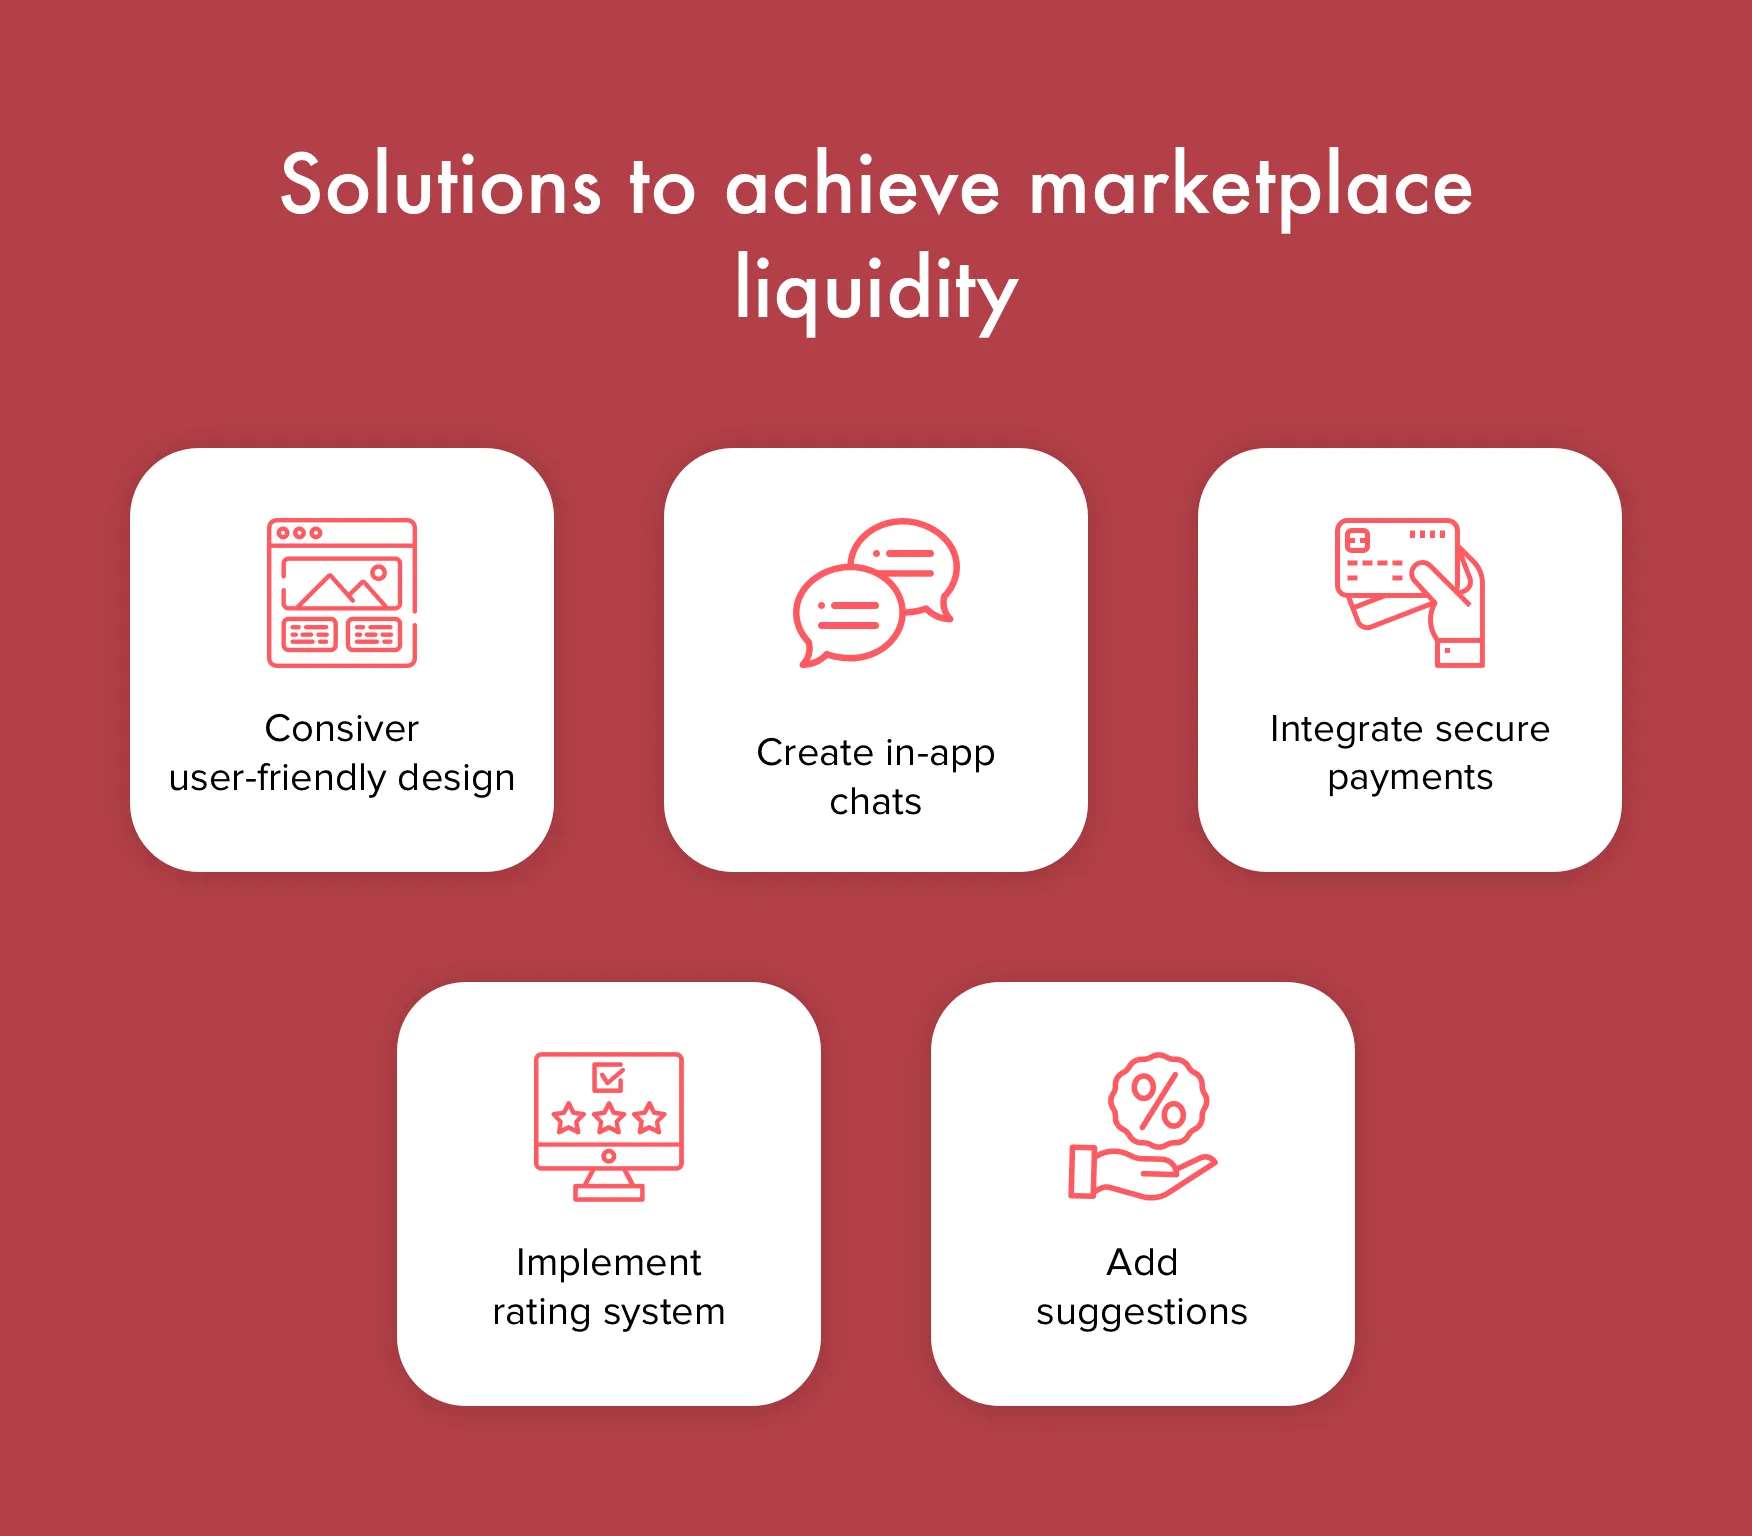 How to achieve high marketplace liquidity